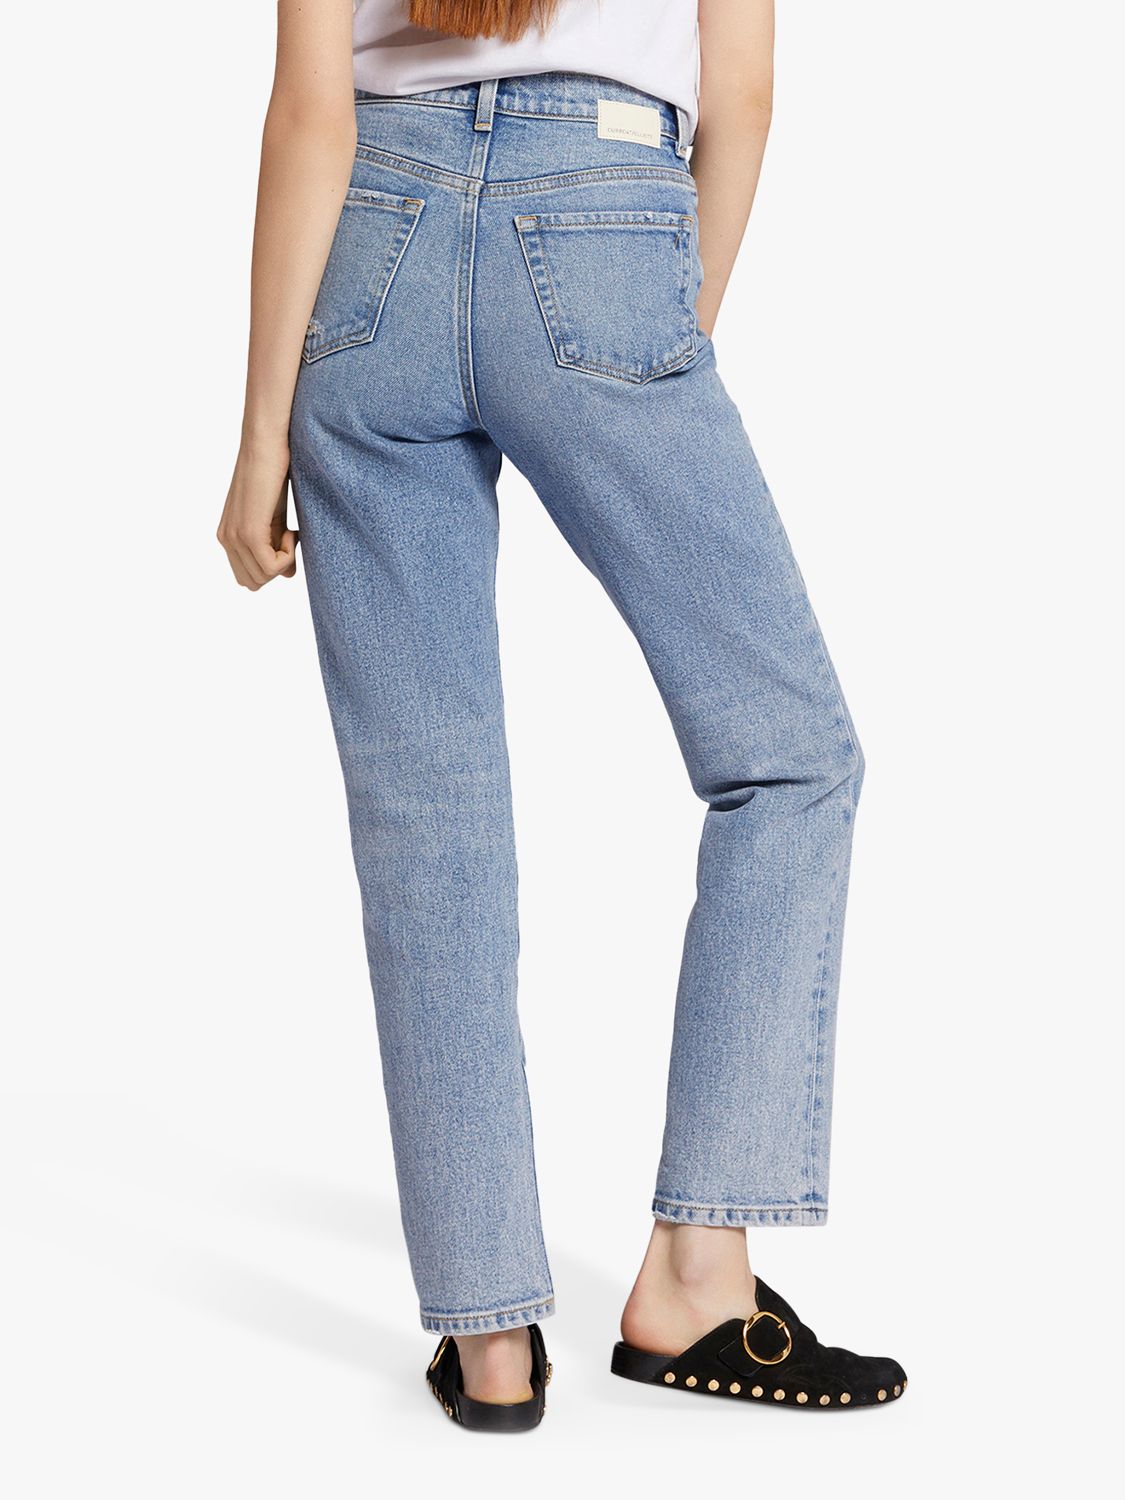 Current/Elliott The Soulmate High Rise Slim Straight Distressed Jeans, Camino Light Blue, W23/L30